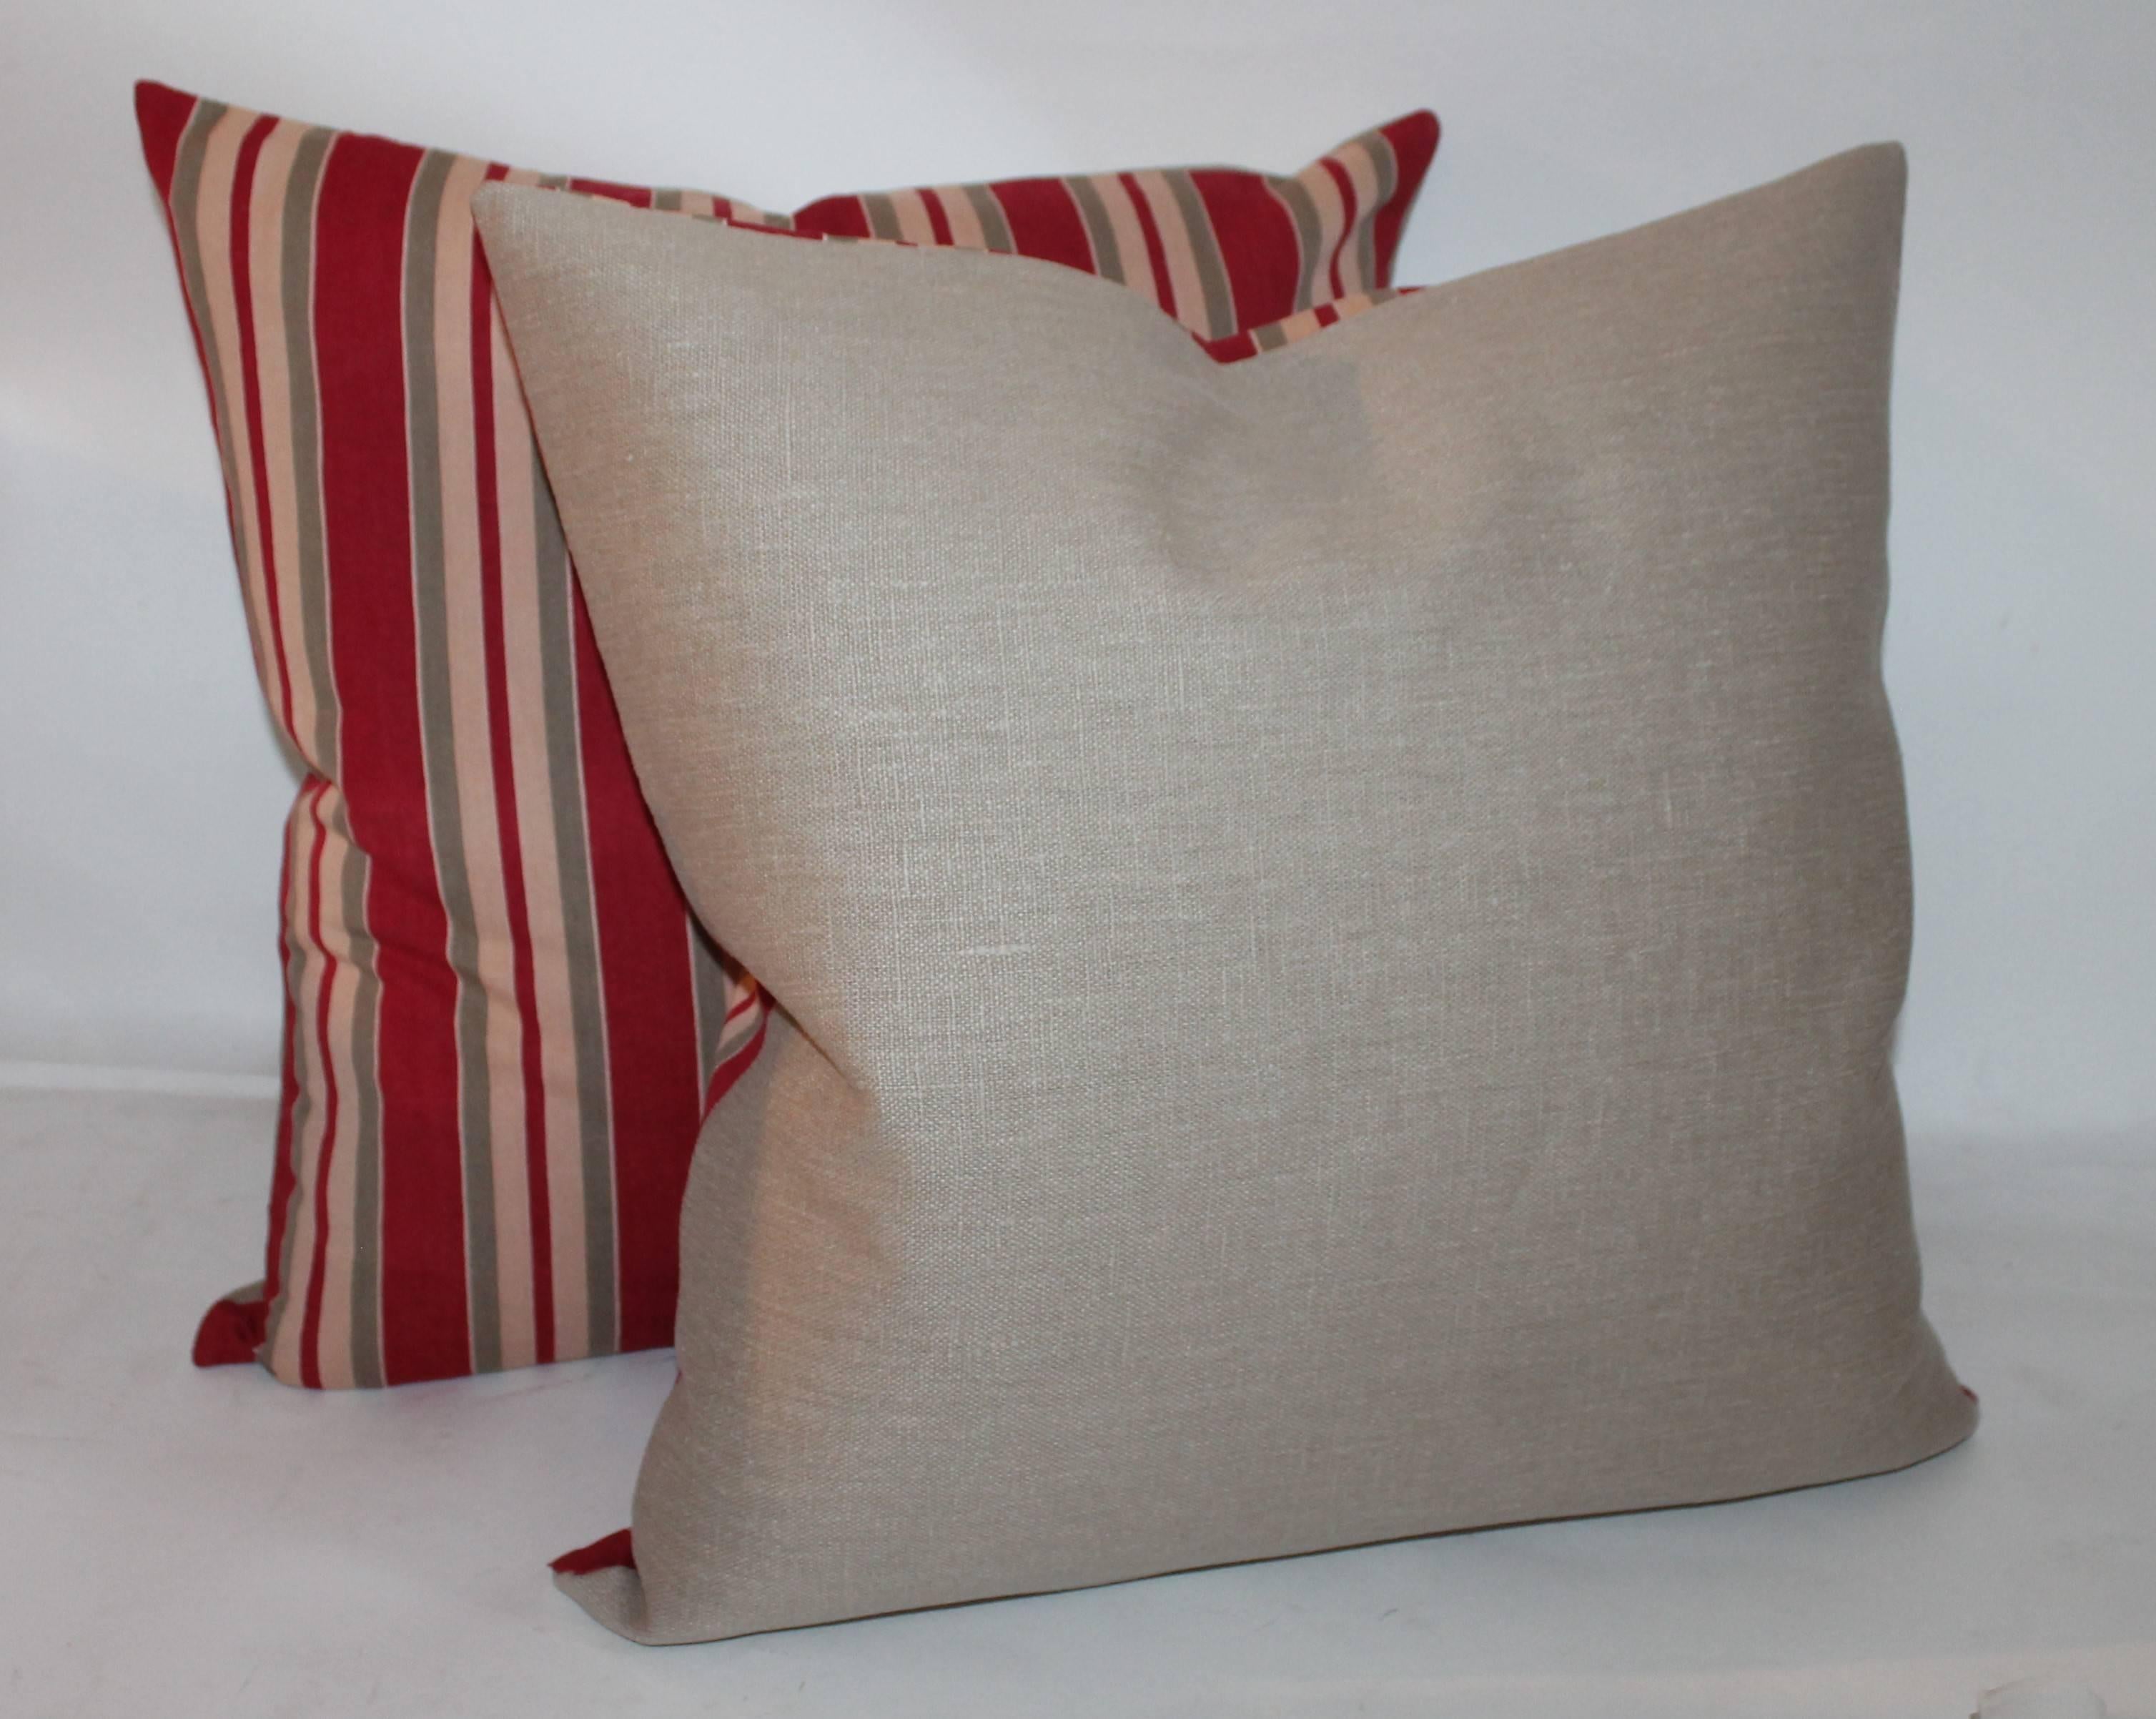 Hand-Crafted European Striped 19th Century Ticking Pillows, Pair For Sale